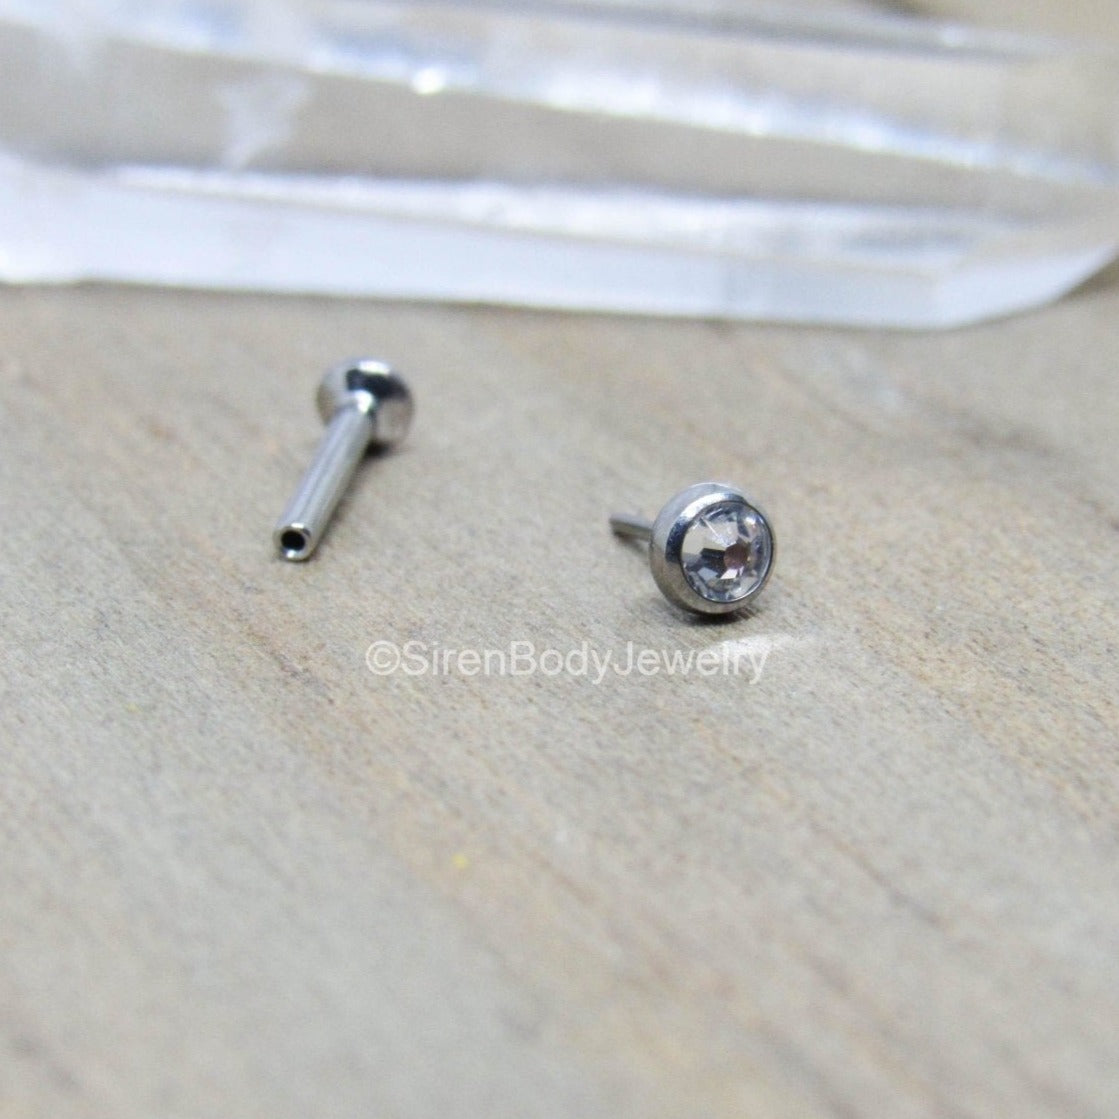 18ct Gold Nose Stud Screw Back with a Cubic Zirconia Stone (2mm - 5mm) |  Gold nose stud, Nose stud, Gold